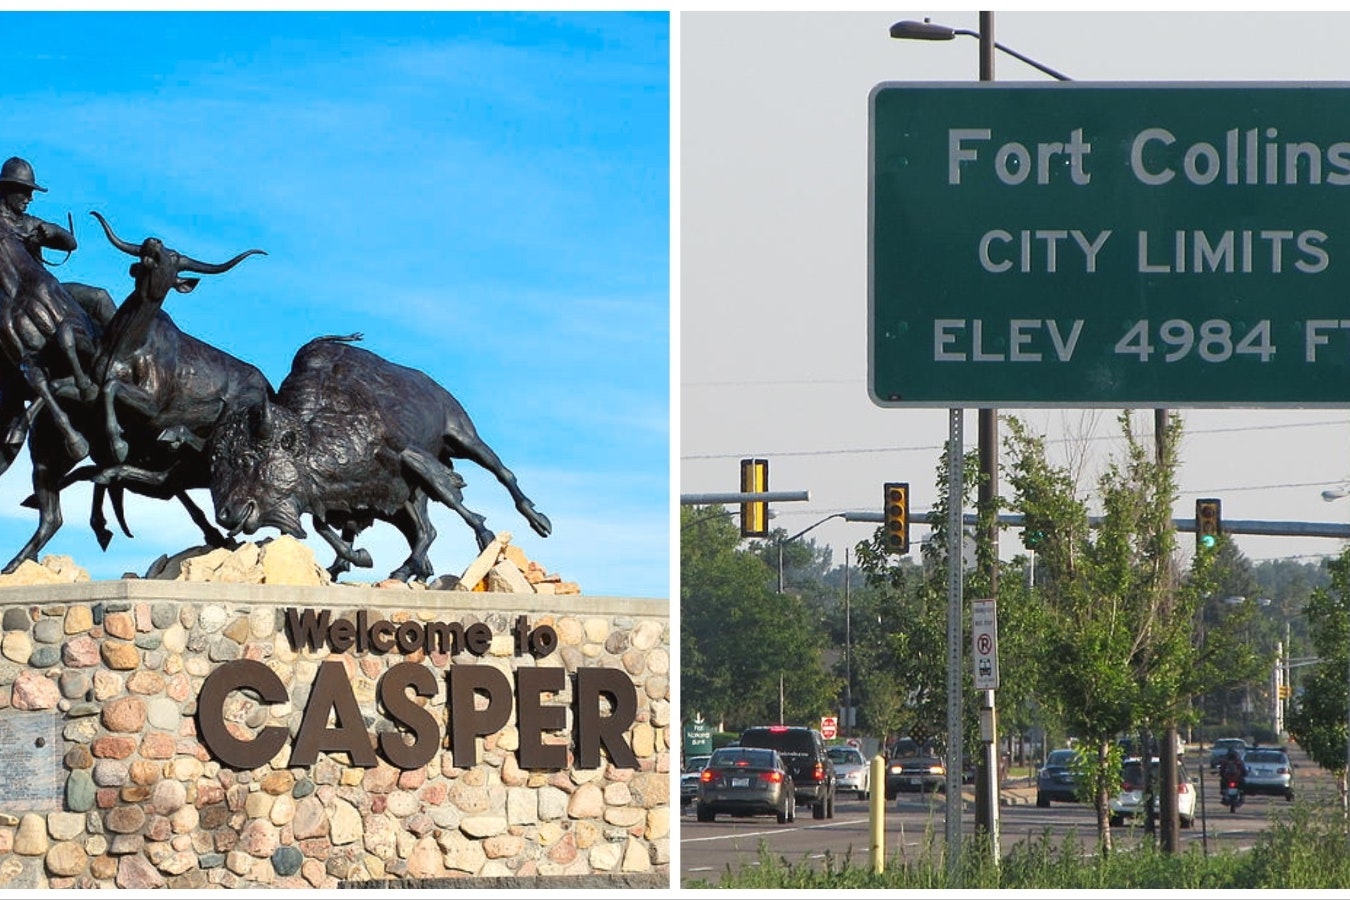 The communities of Casper, Wyoming, and Fort Collins, Colorado, are connected by more than 222 miles of Interstate 25. Fort Collins was named for Lt. Col. William O. Collins and Casper for his son, 2nd Lt. Caspar Collins.